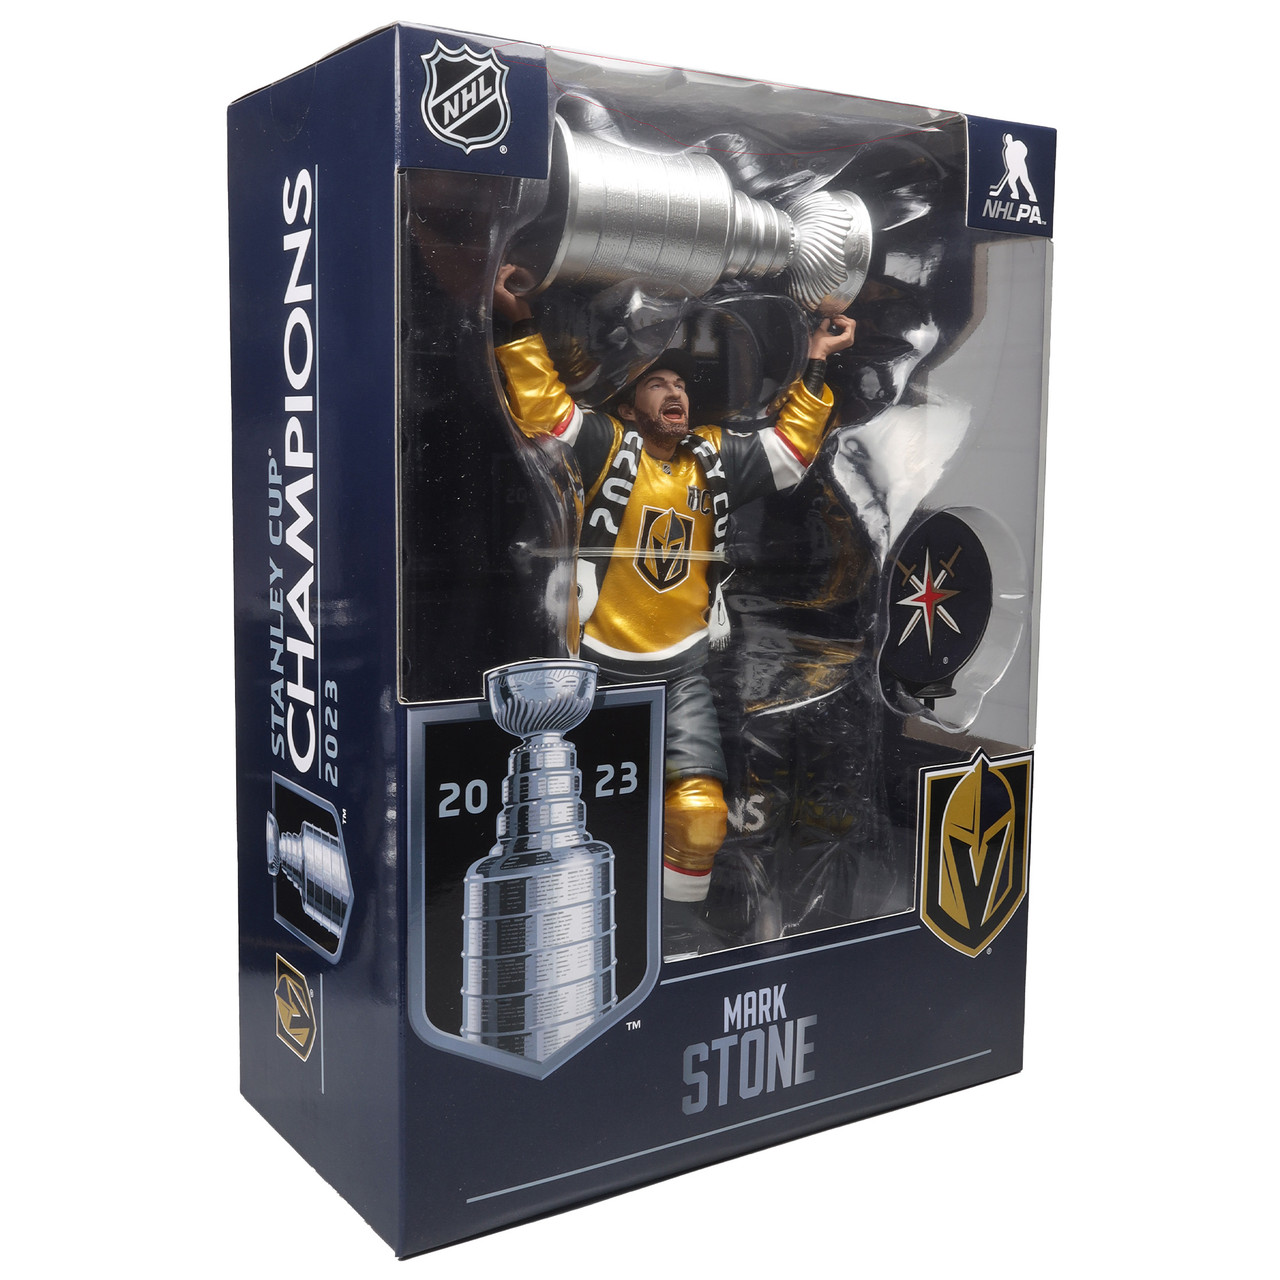 NHL: Advent Calendar - Road to the Stanley Cup - 2019. - Toy Sense